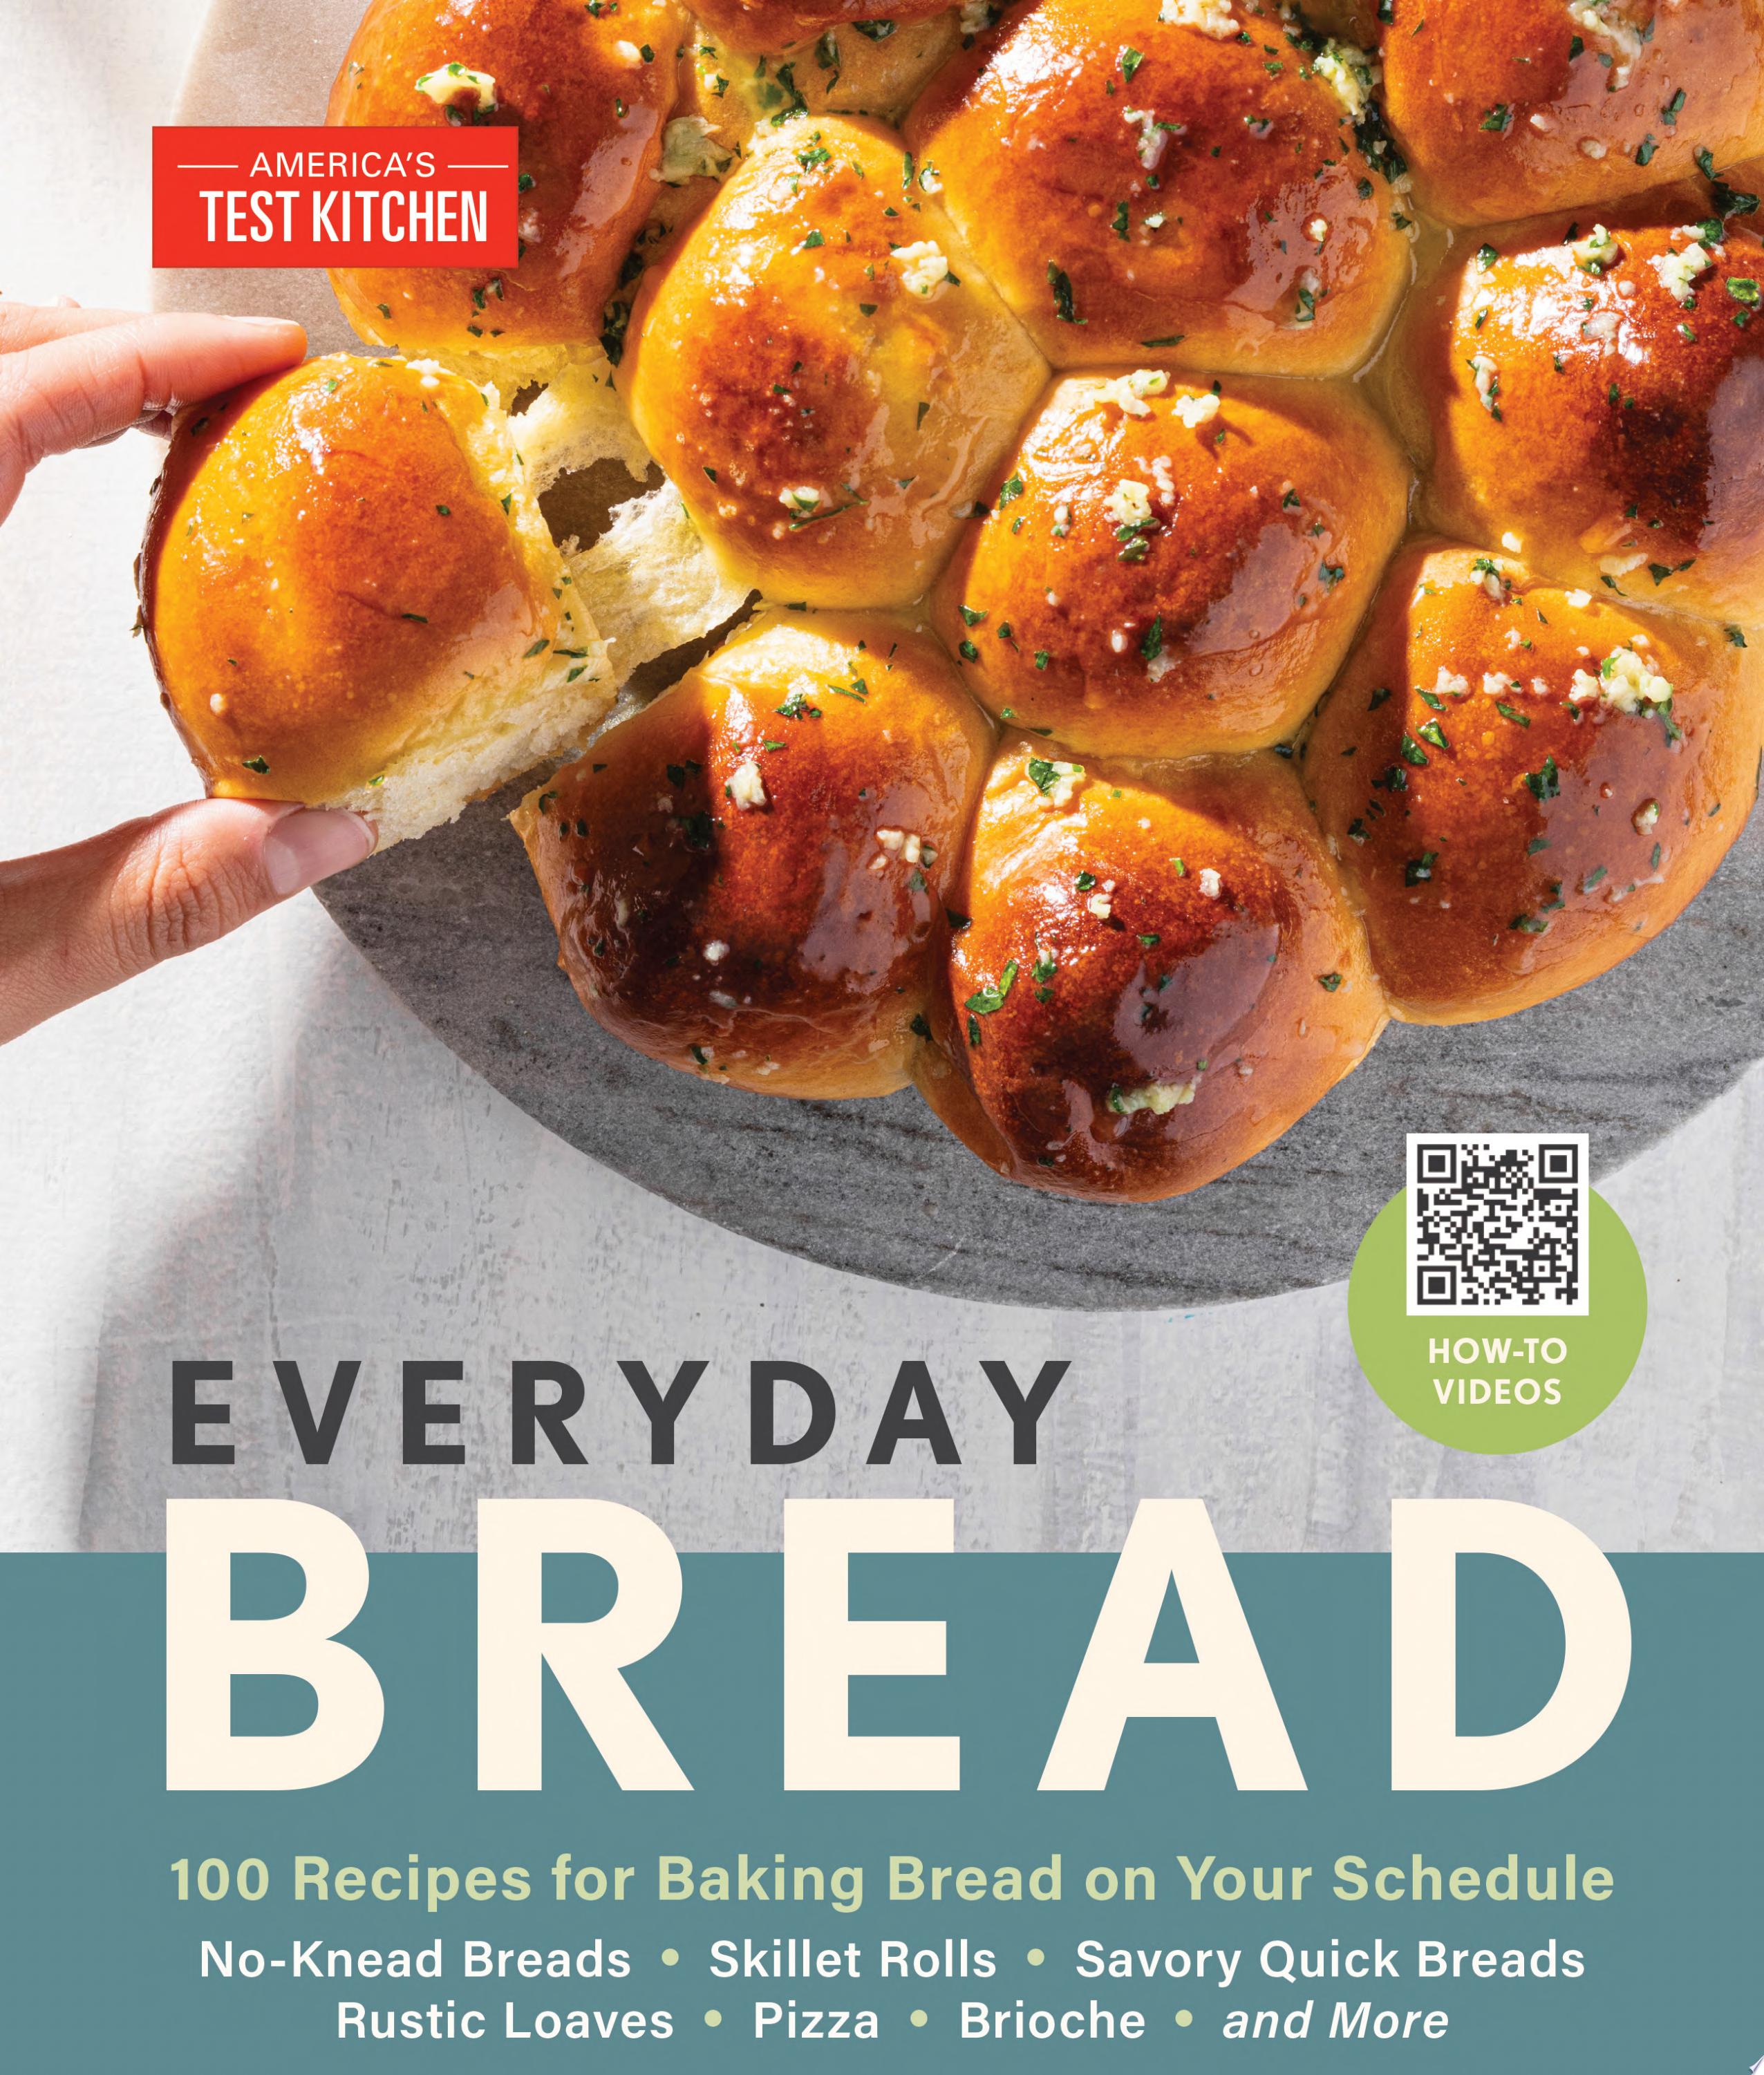 Image for "Everyday Bread"